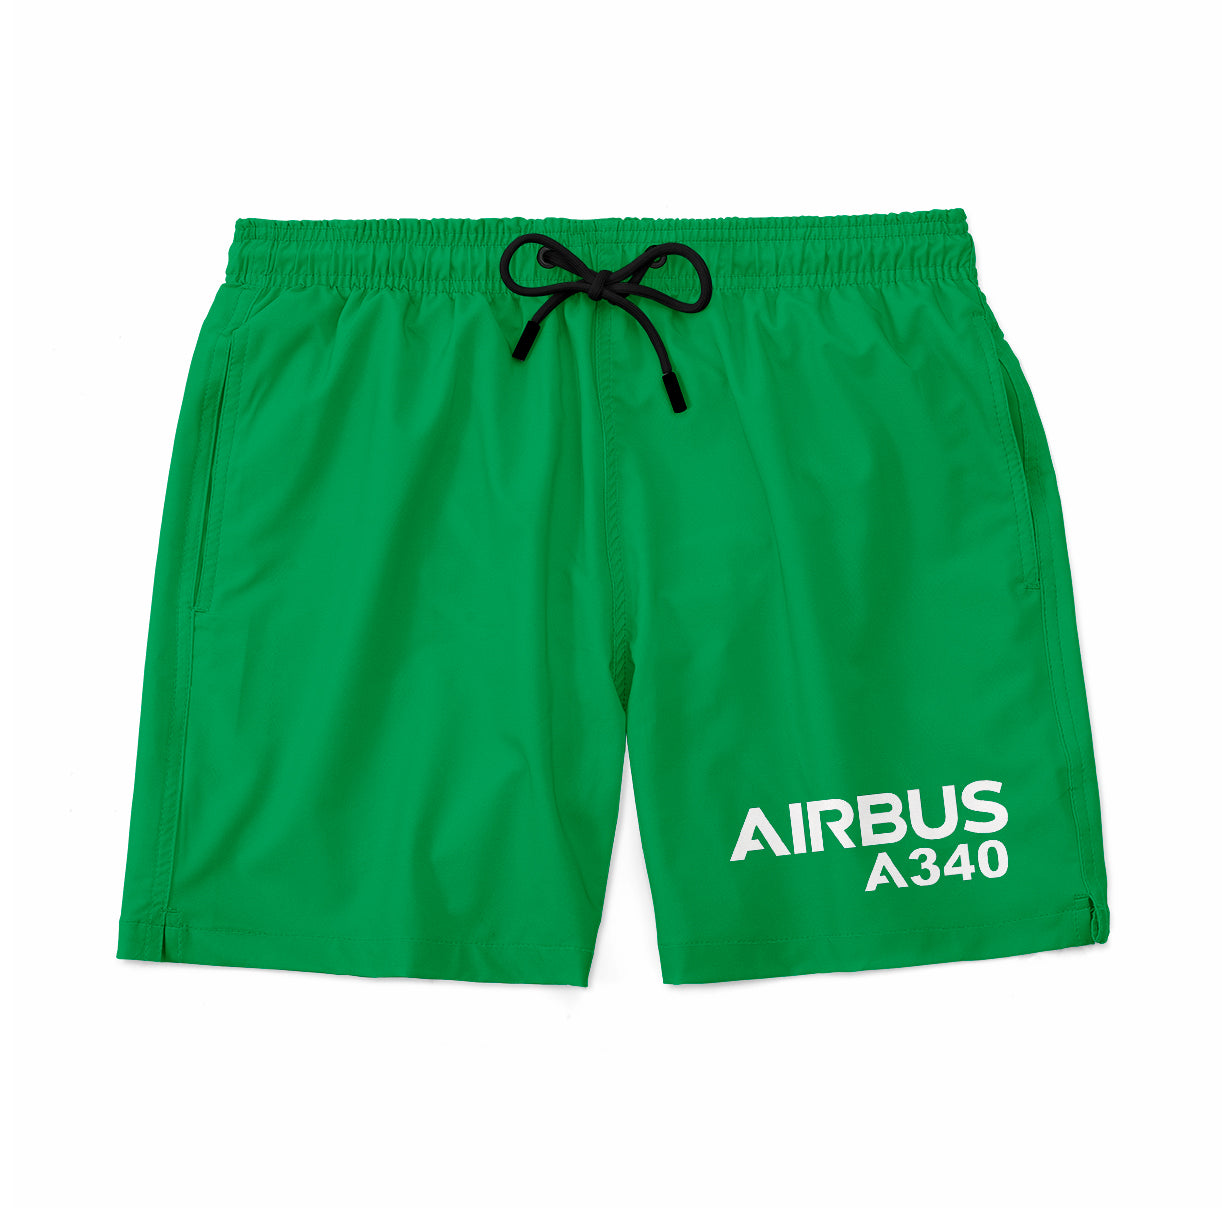 Airbus A340 & Text Designed Swim Trunks & Shorts